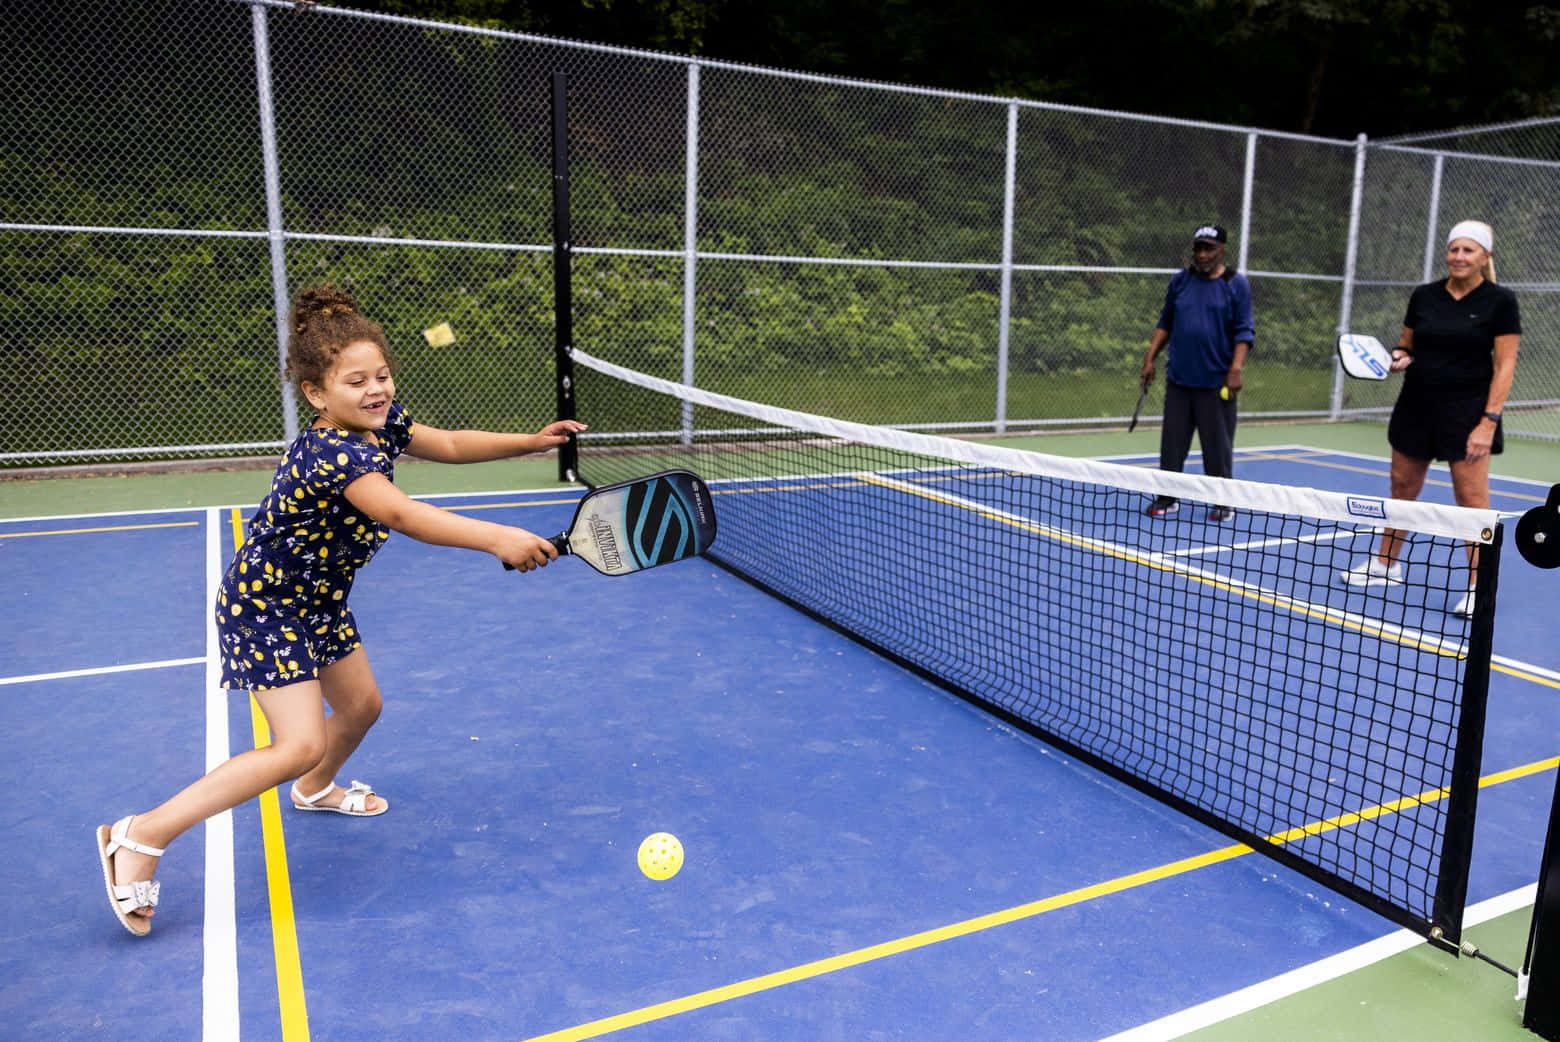 A Girl Is Playing Tennis On A Court